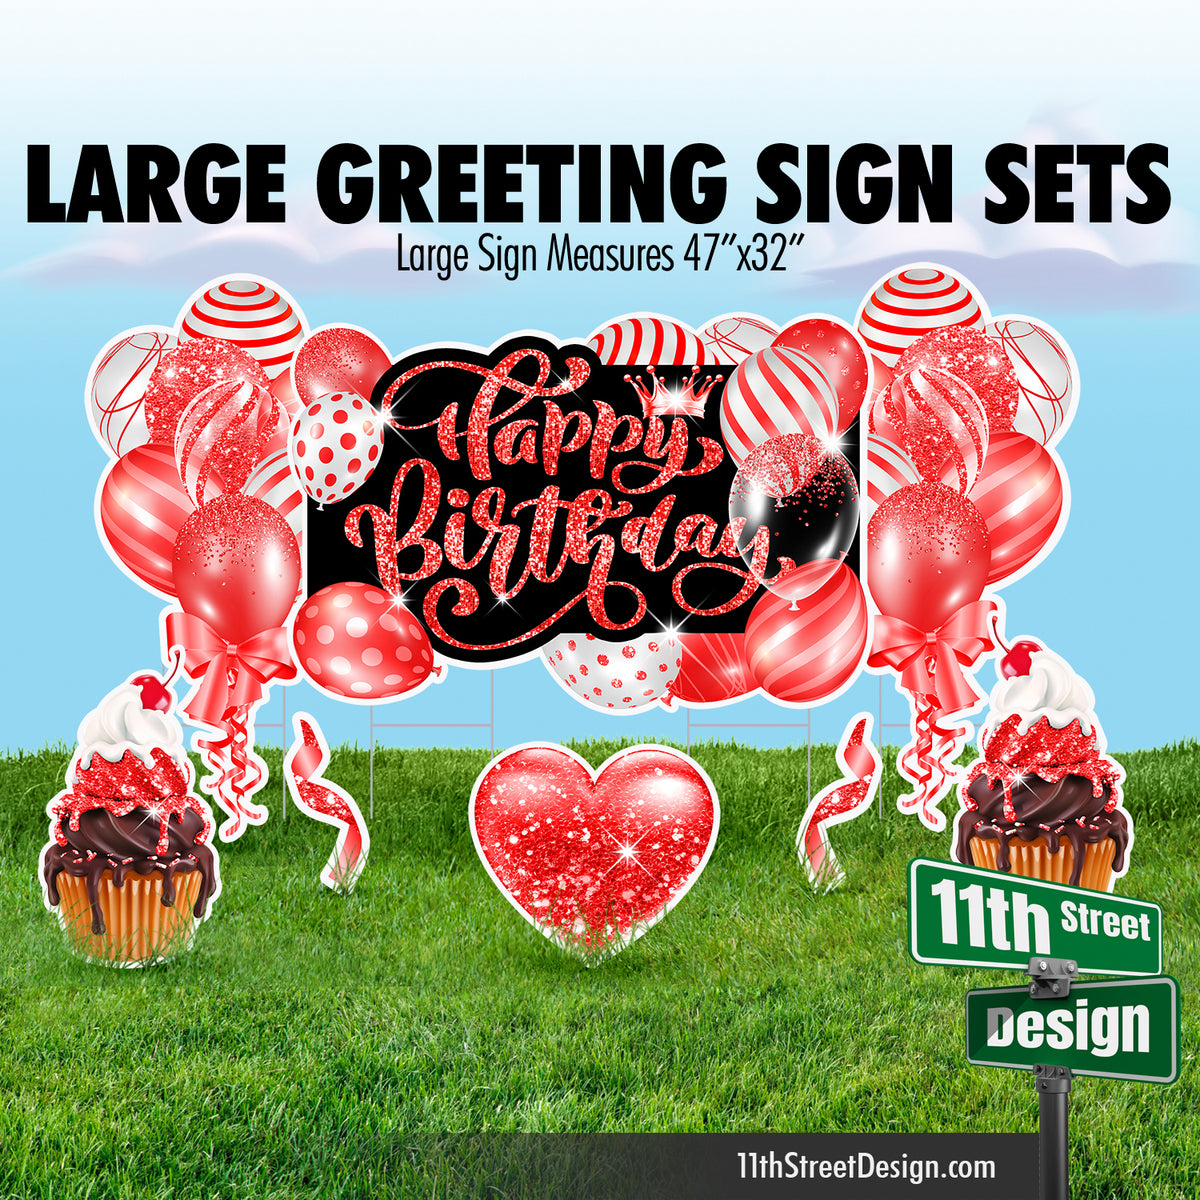 Happy Birthday Large Greeting Sign Flair Set - Red